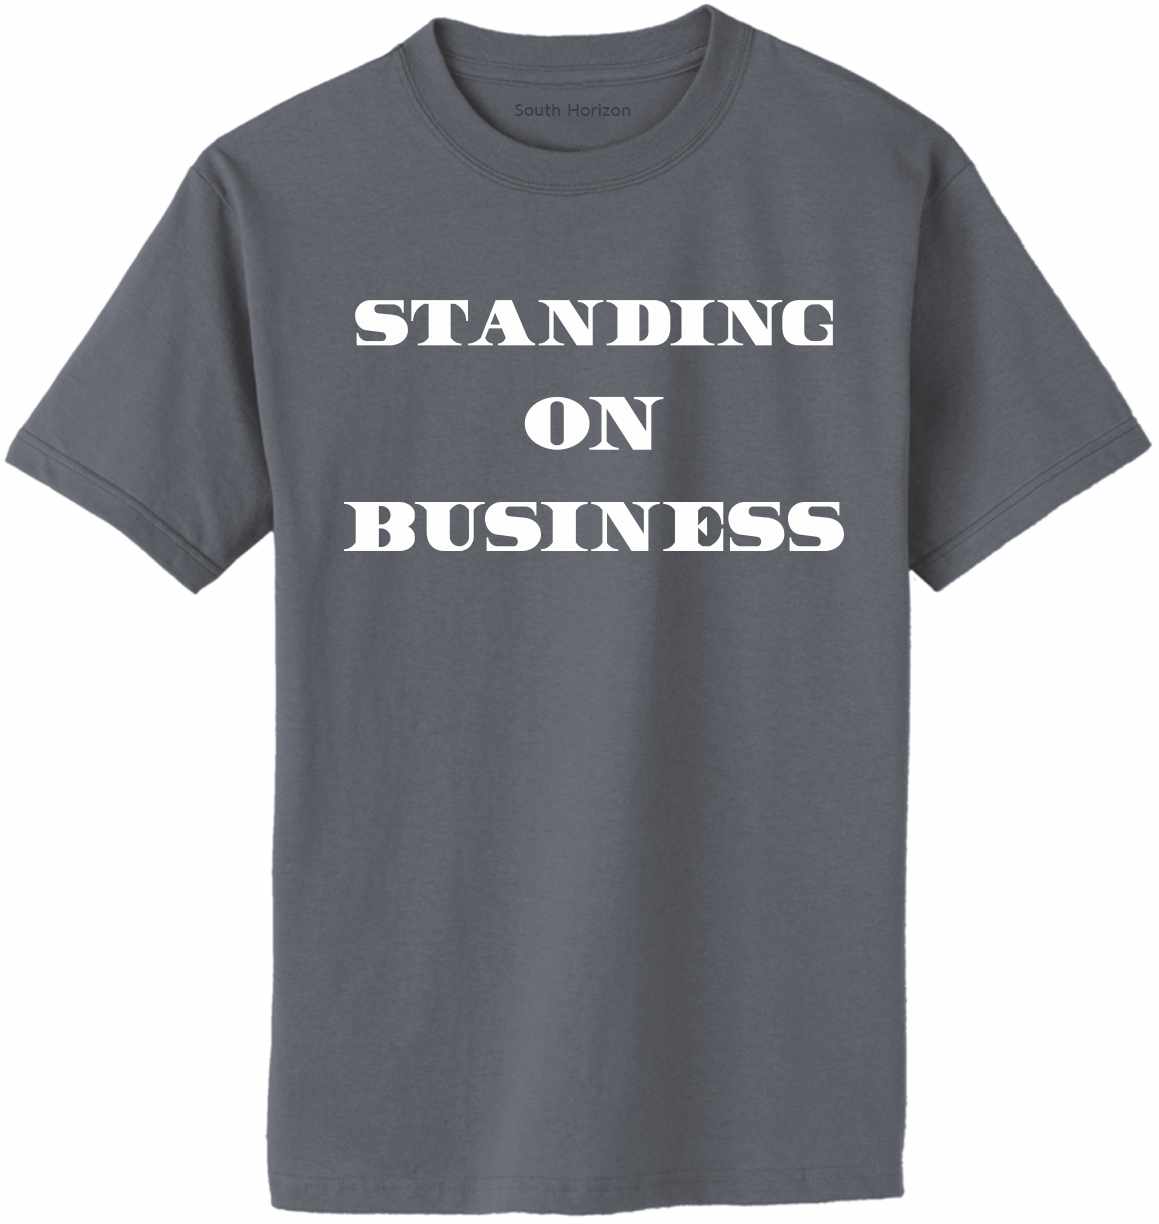 Standing On Business on Adult T-Shirt (#1398-1)